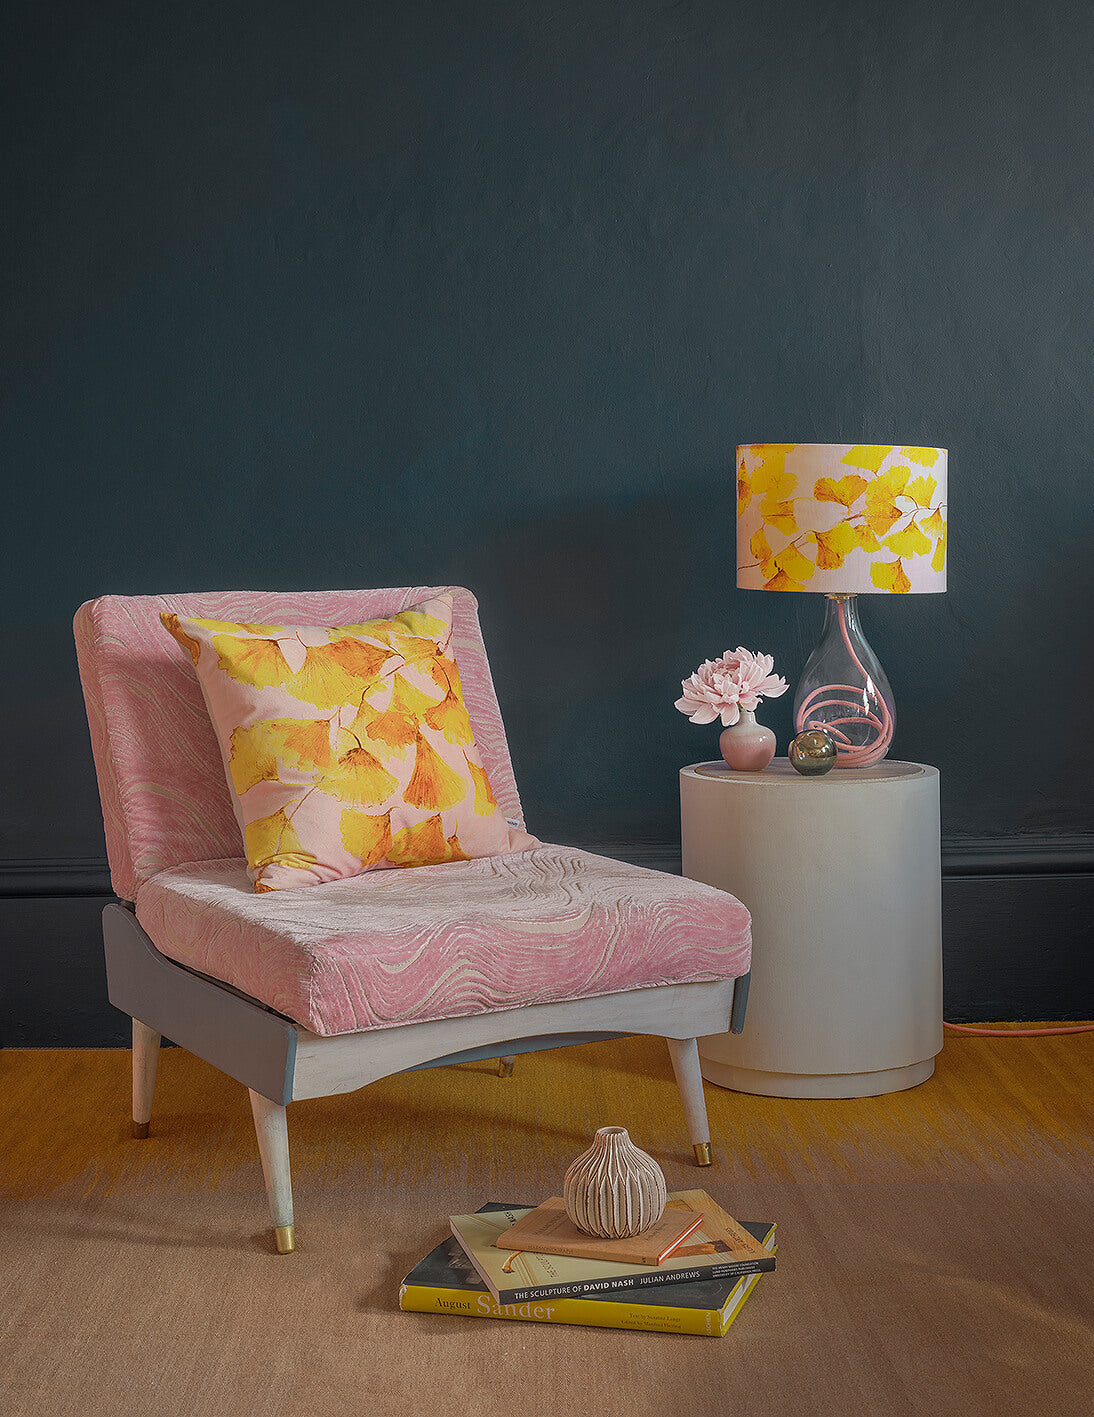 Yellow velvet cushion and glass lamp with Rose flex - Ginkgo in Sunshine - by Anna Jacobs - in a living room lifestyle setting